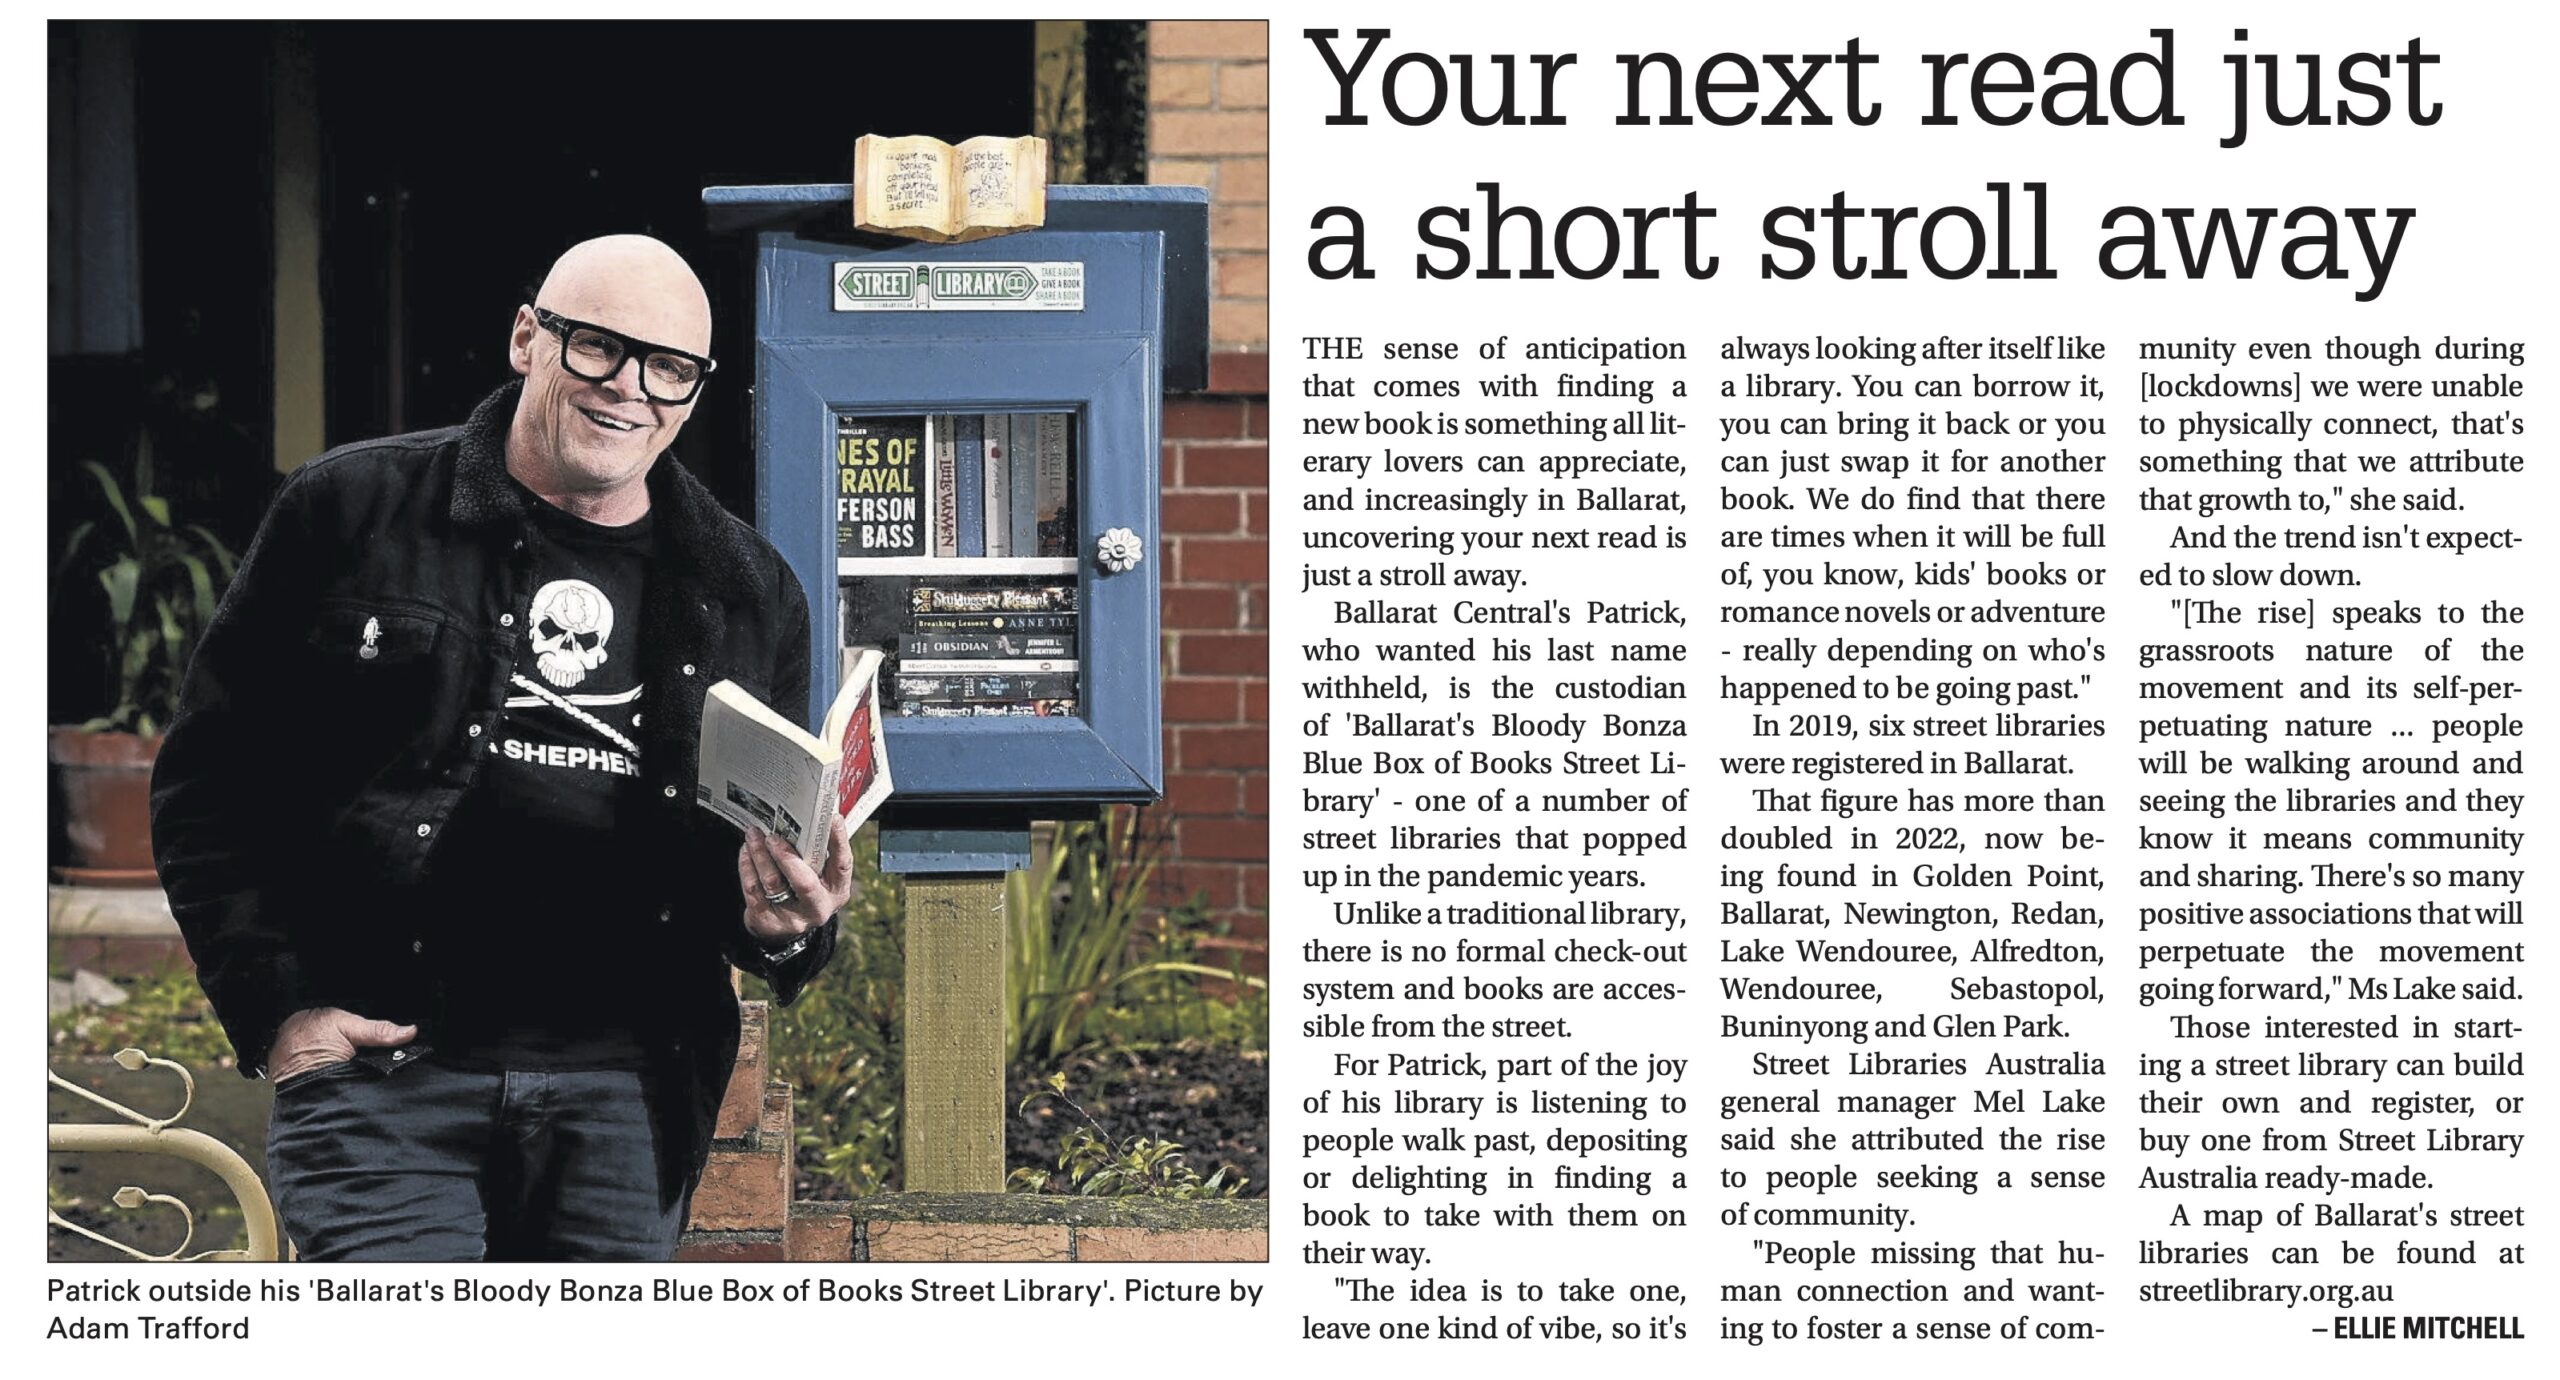 An article on the growing Street Library population in Ballarat, VIC